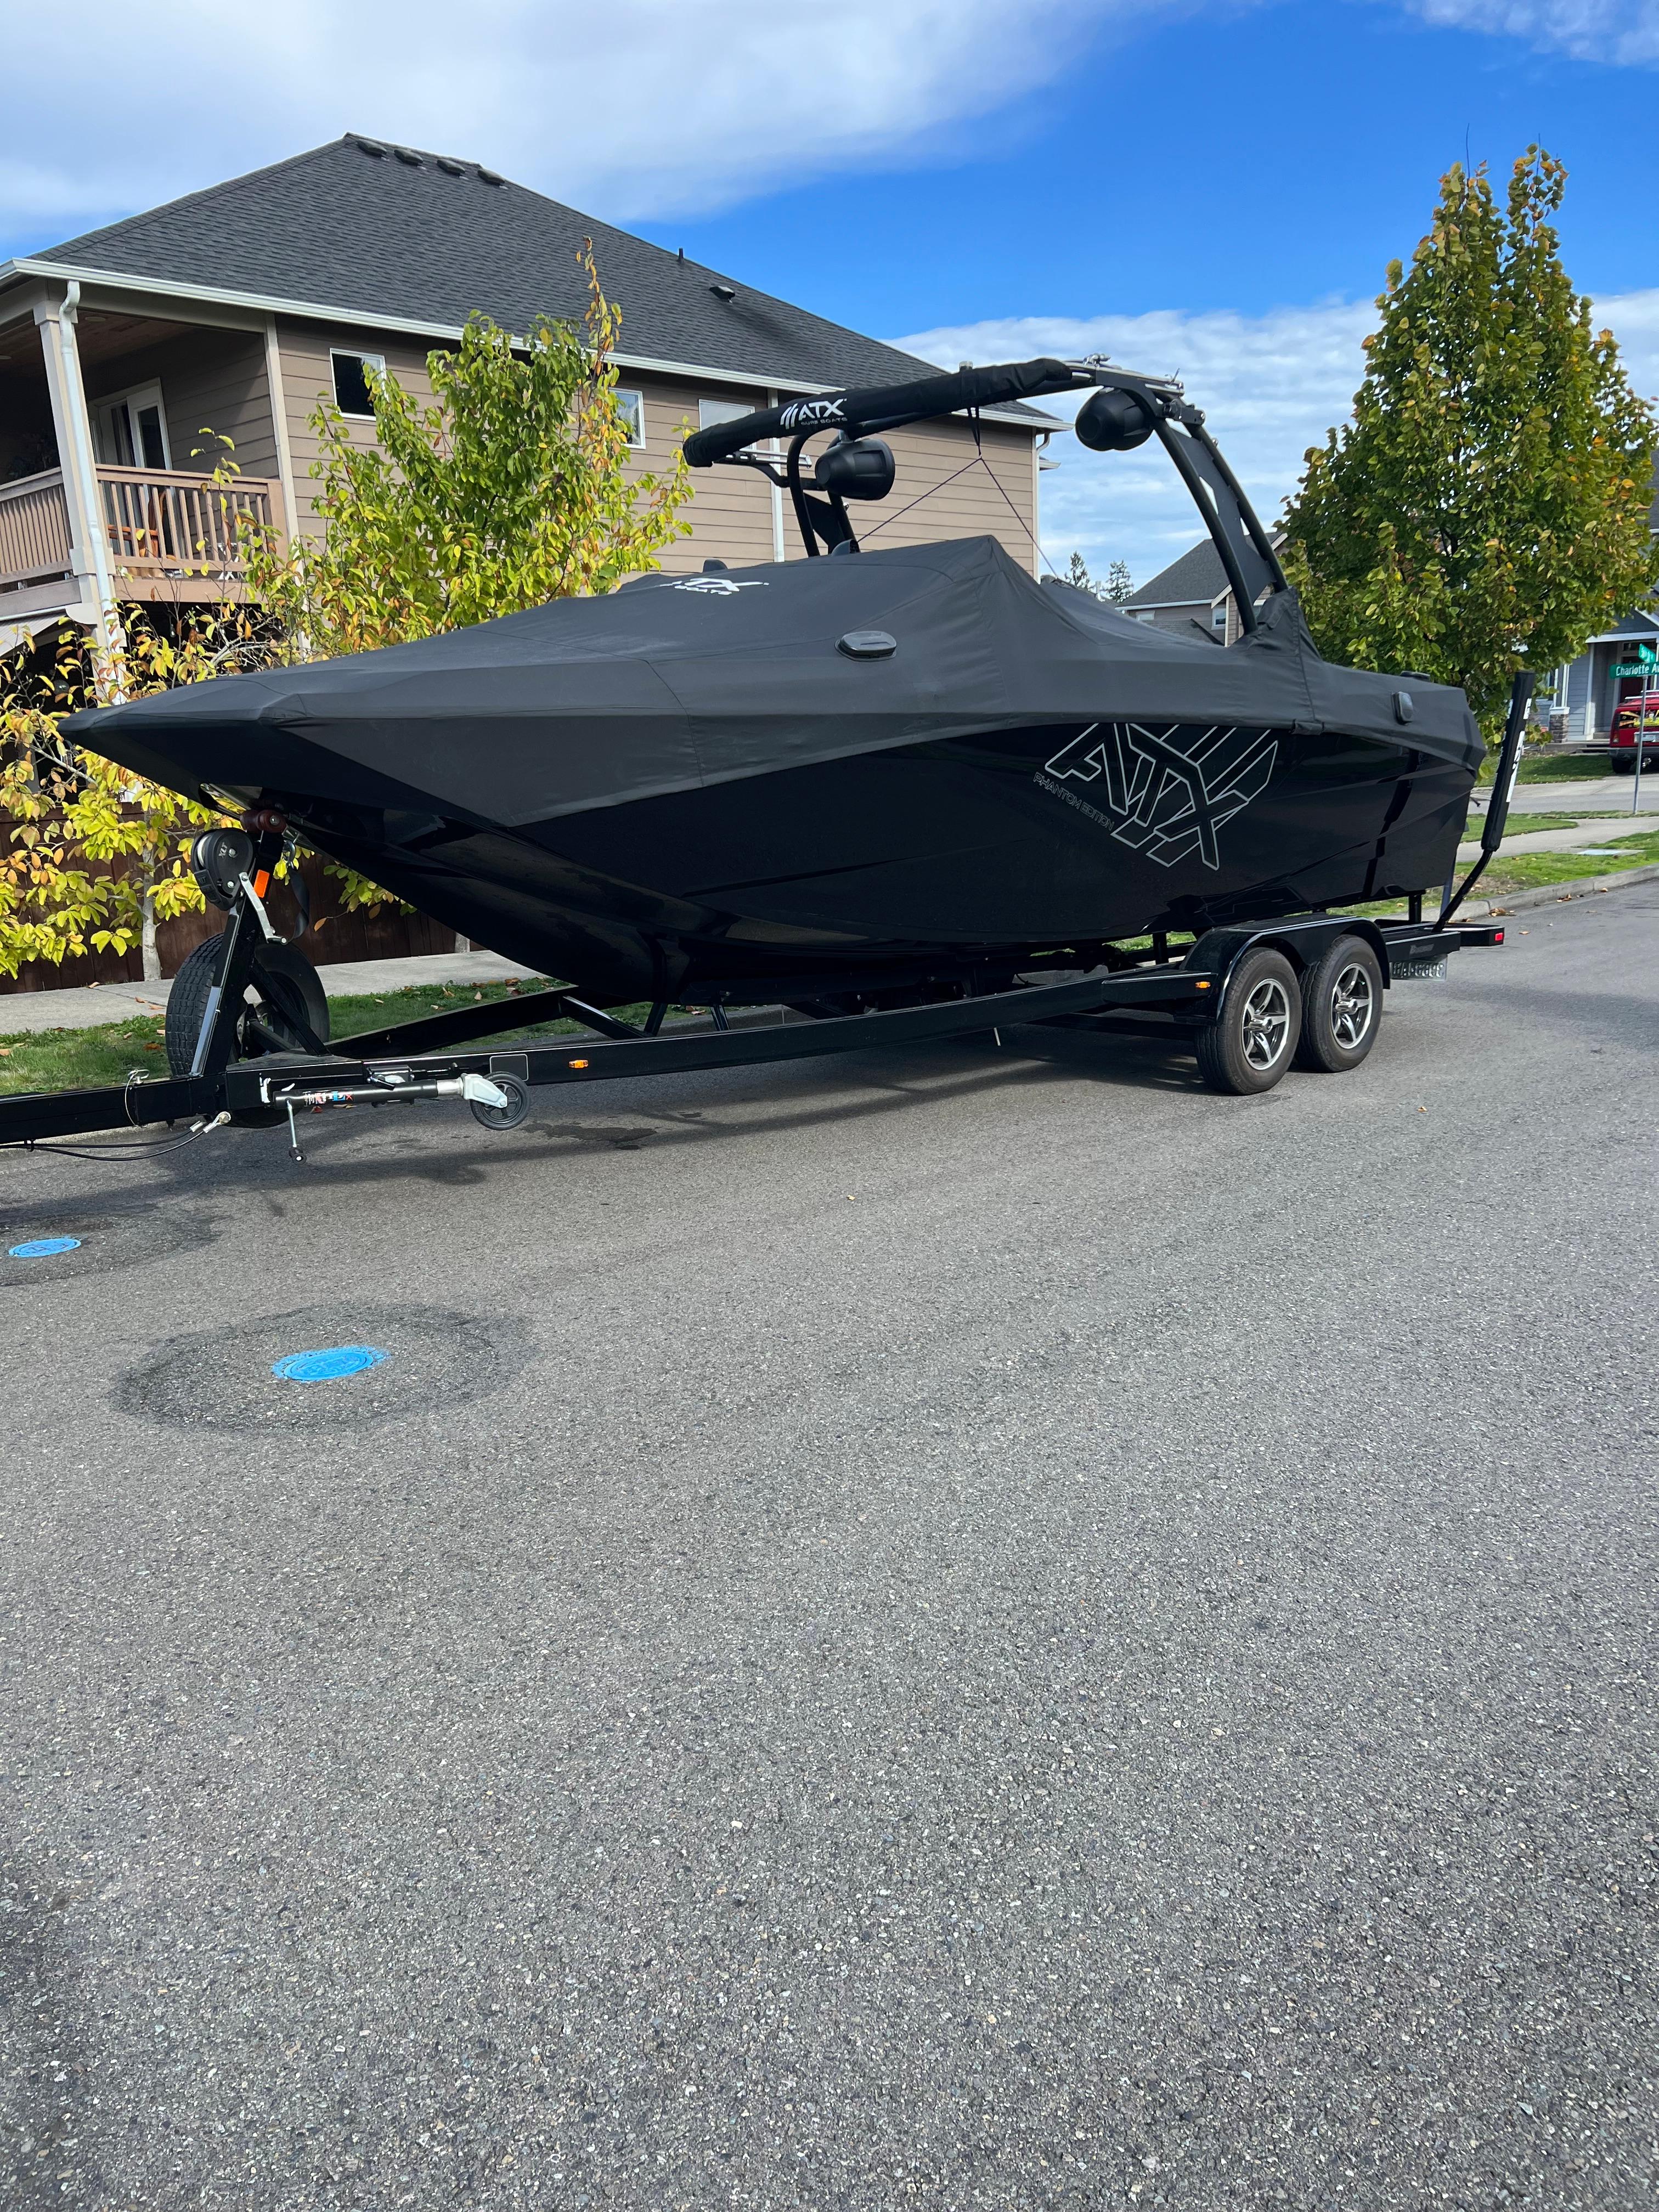 2021 ATX Surf Boats 24 Type-S